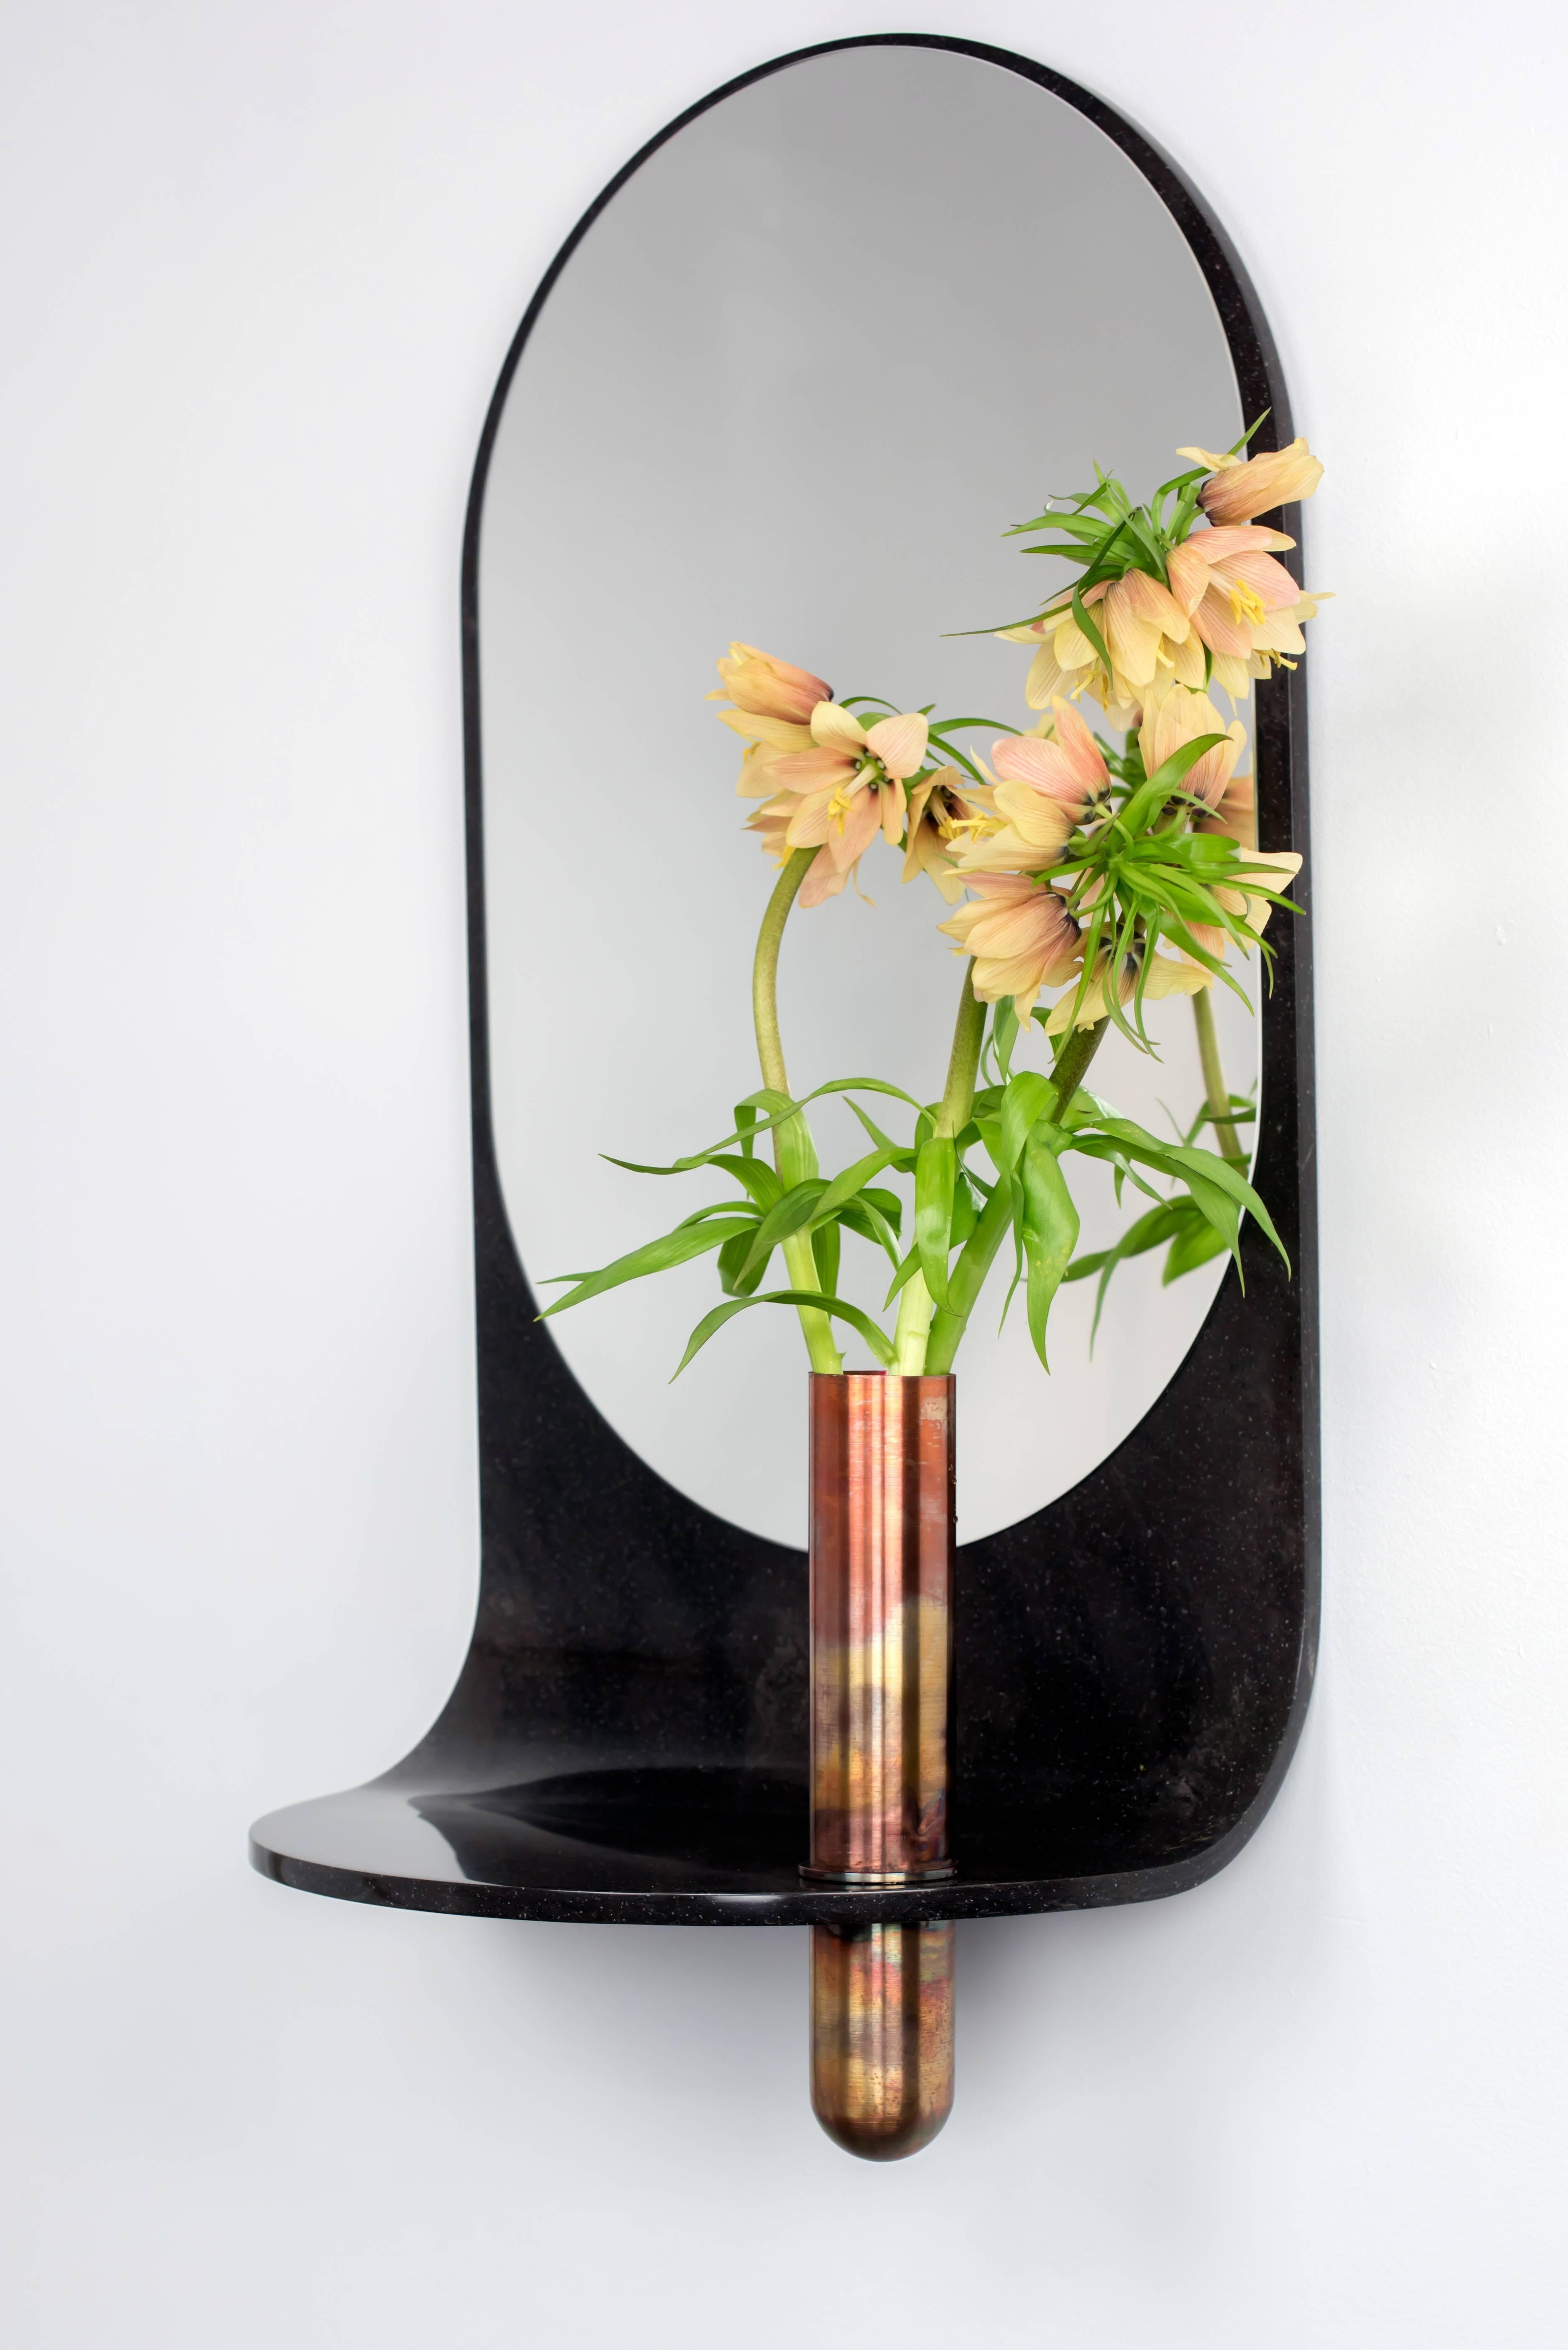 Swoop Mirror in Curved Stone with Copper Vase by Birnam Wood Studio 5